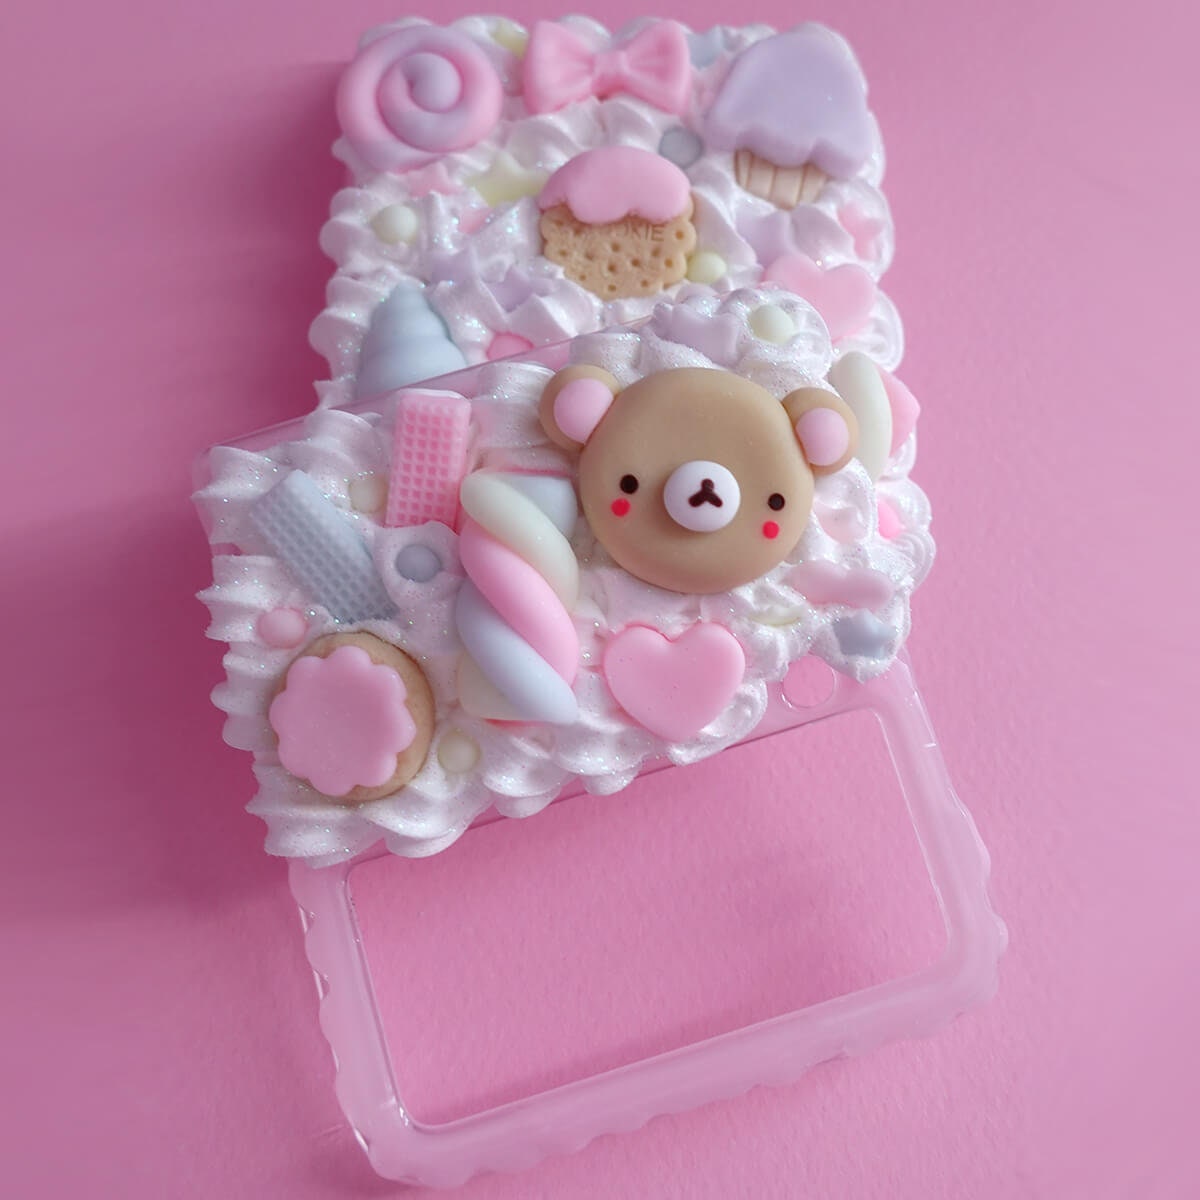 Decoden Phone Case DIY Kit Kawaii Boy Girl Lovers Kiss Bench Frames Bows  Cream and Charms for Samsung Android Apple iPhone Tablet 